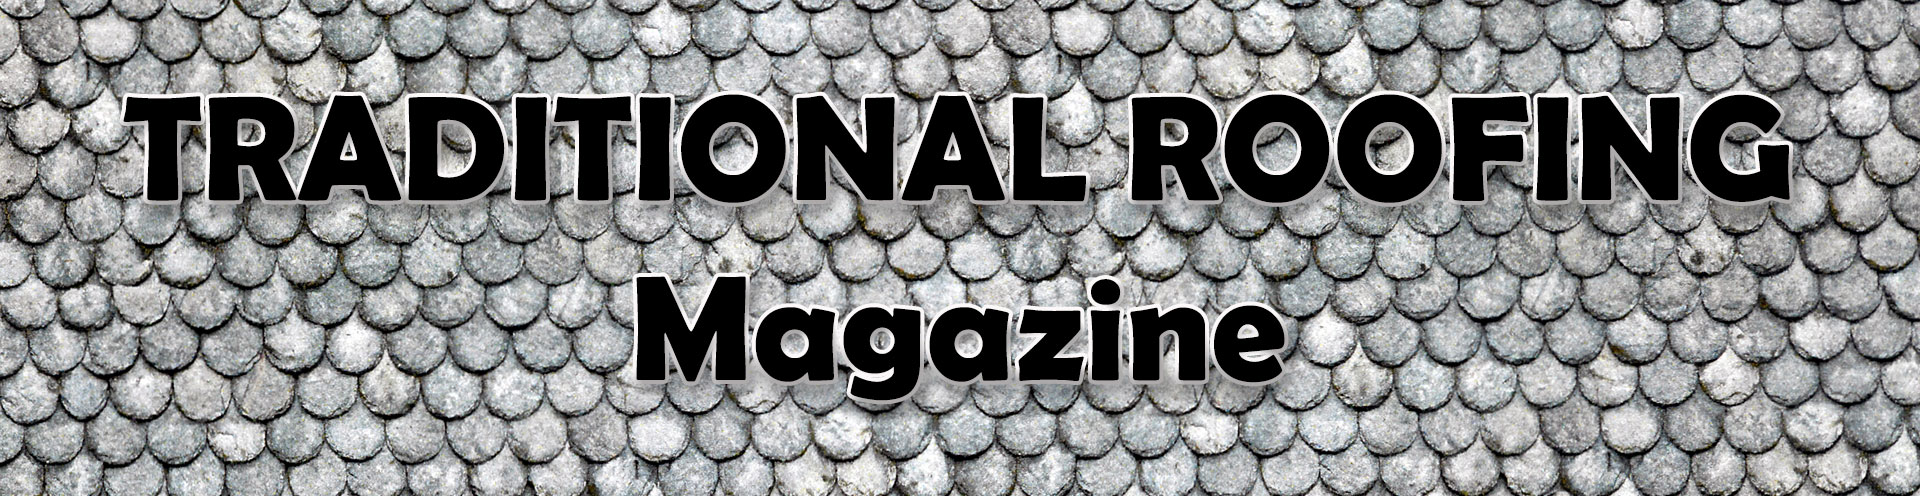 Traditional Roofing Magazine